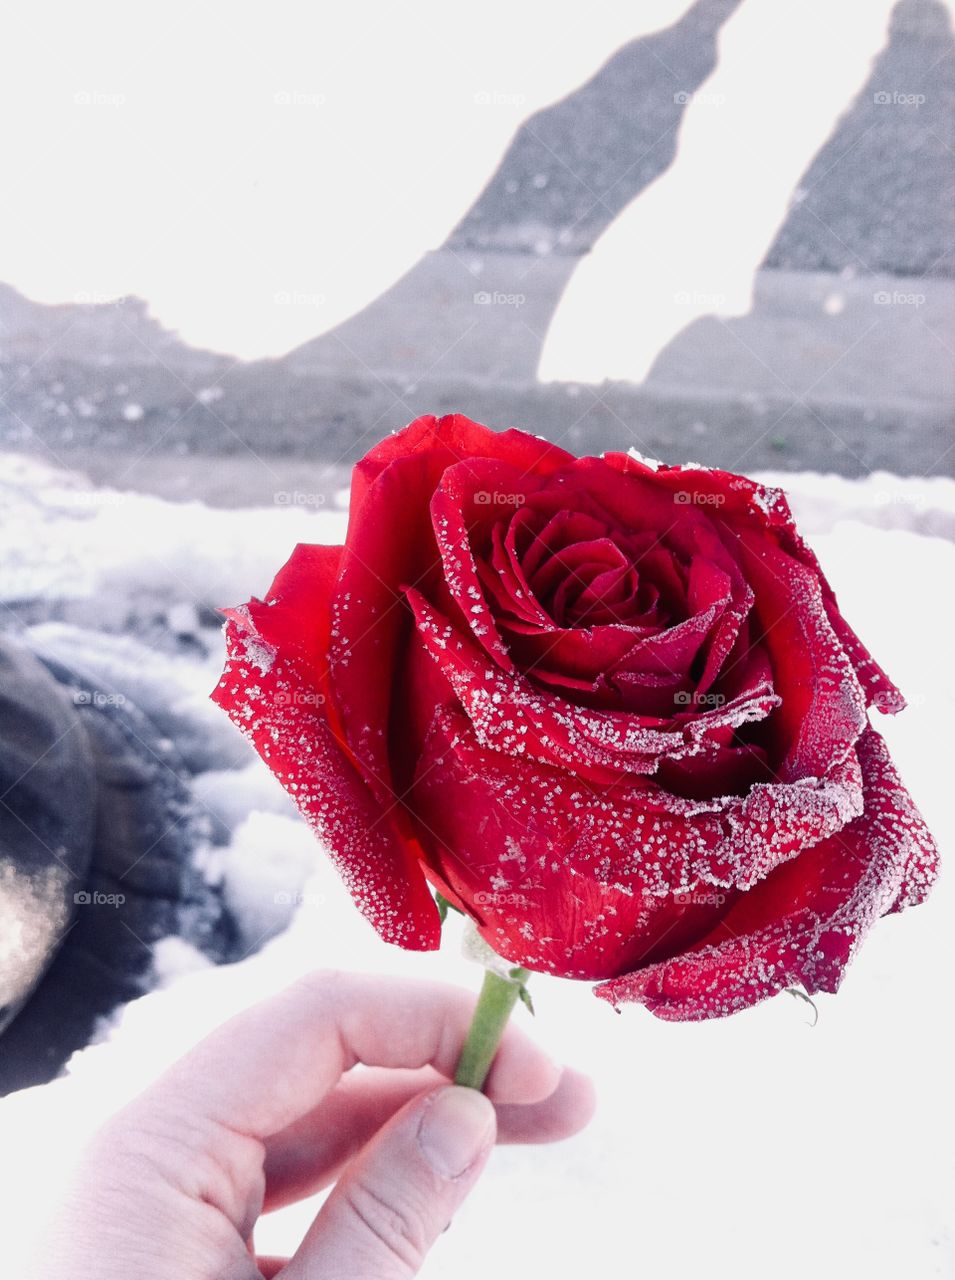 This red rose was left in the snow after a wedding. The frost then clung to it and created a classic color harmony.